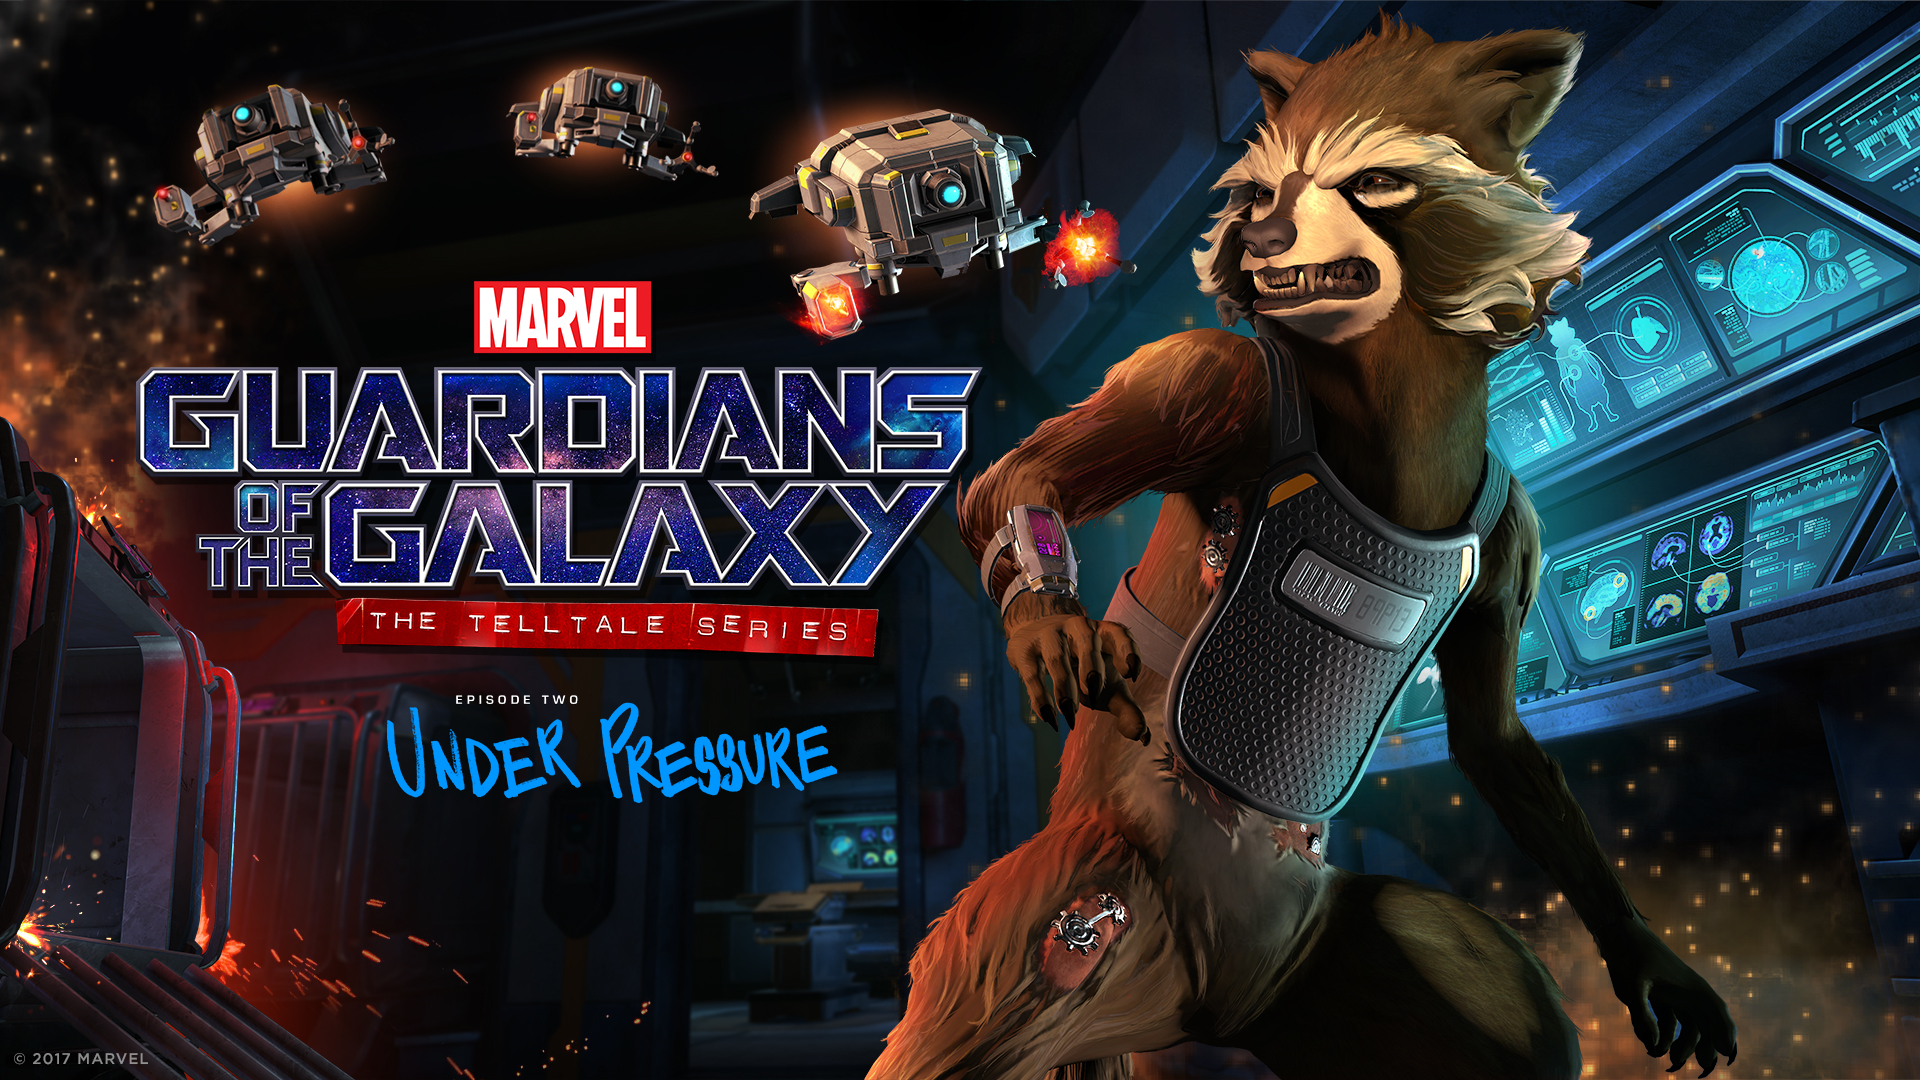 Telltale's 'Guardians of the Galaxy' Episode 2 "Under Pressure" Releases on June 6th